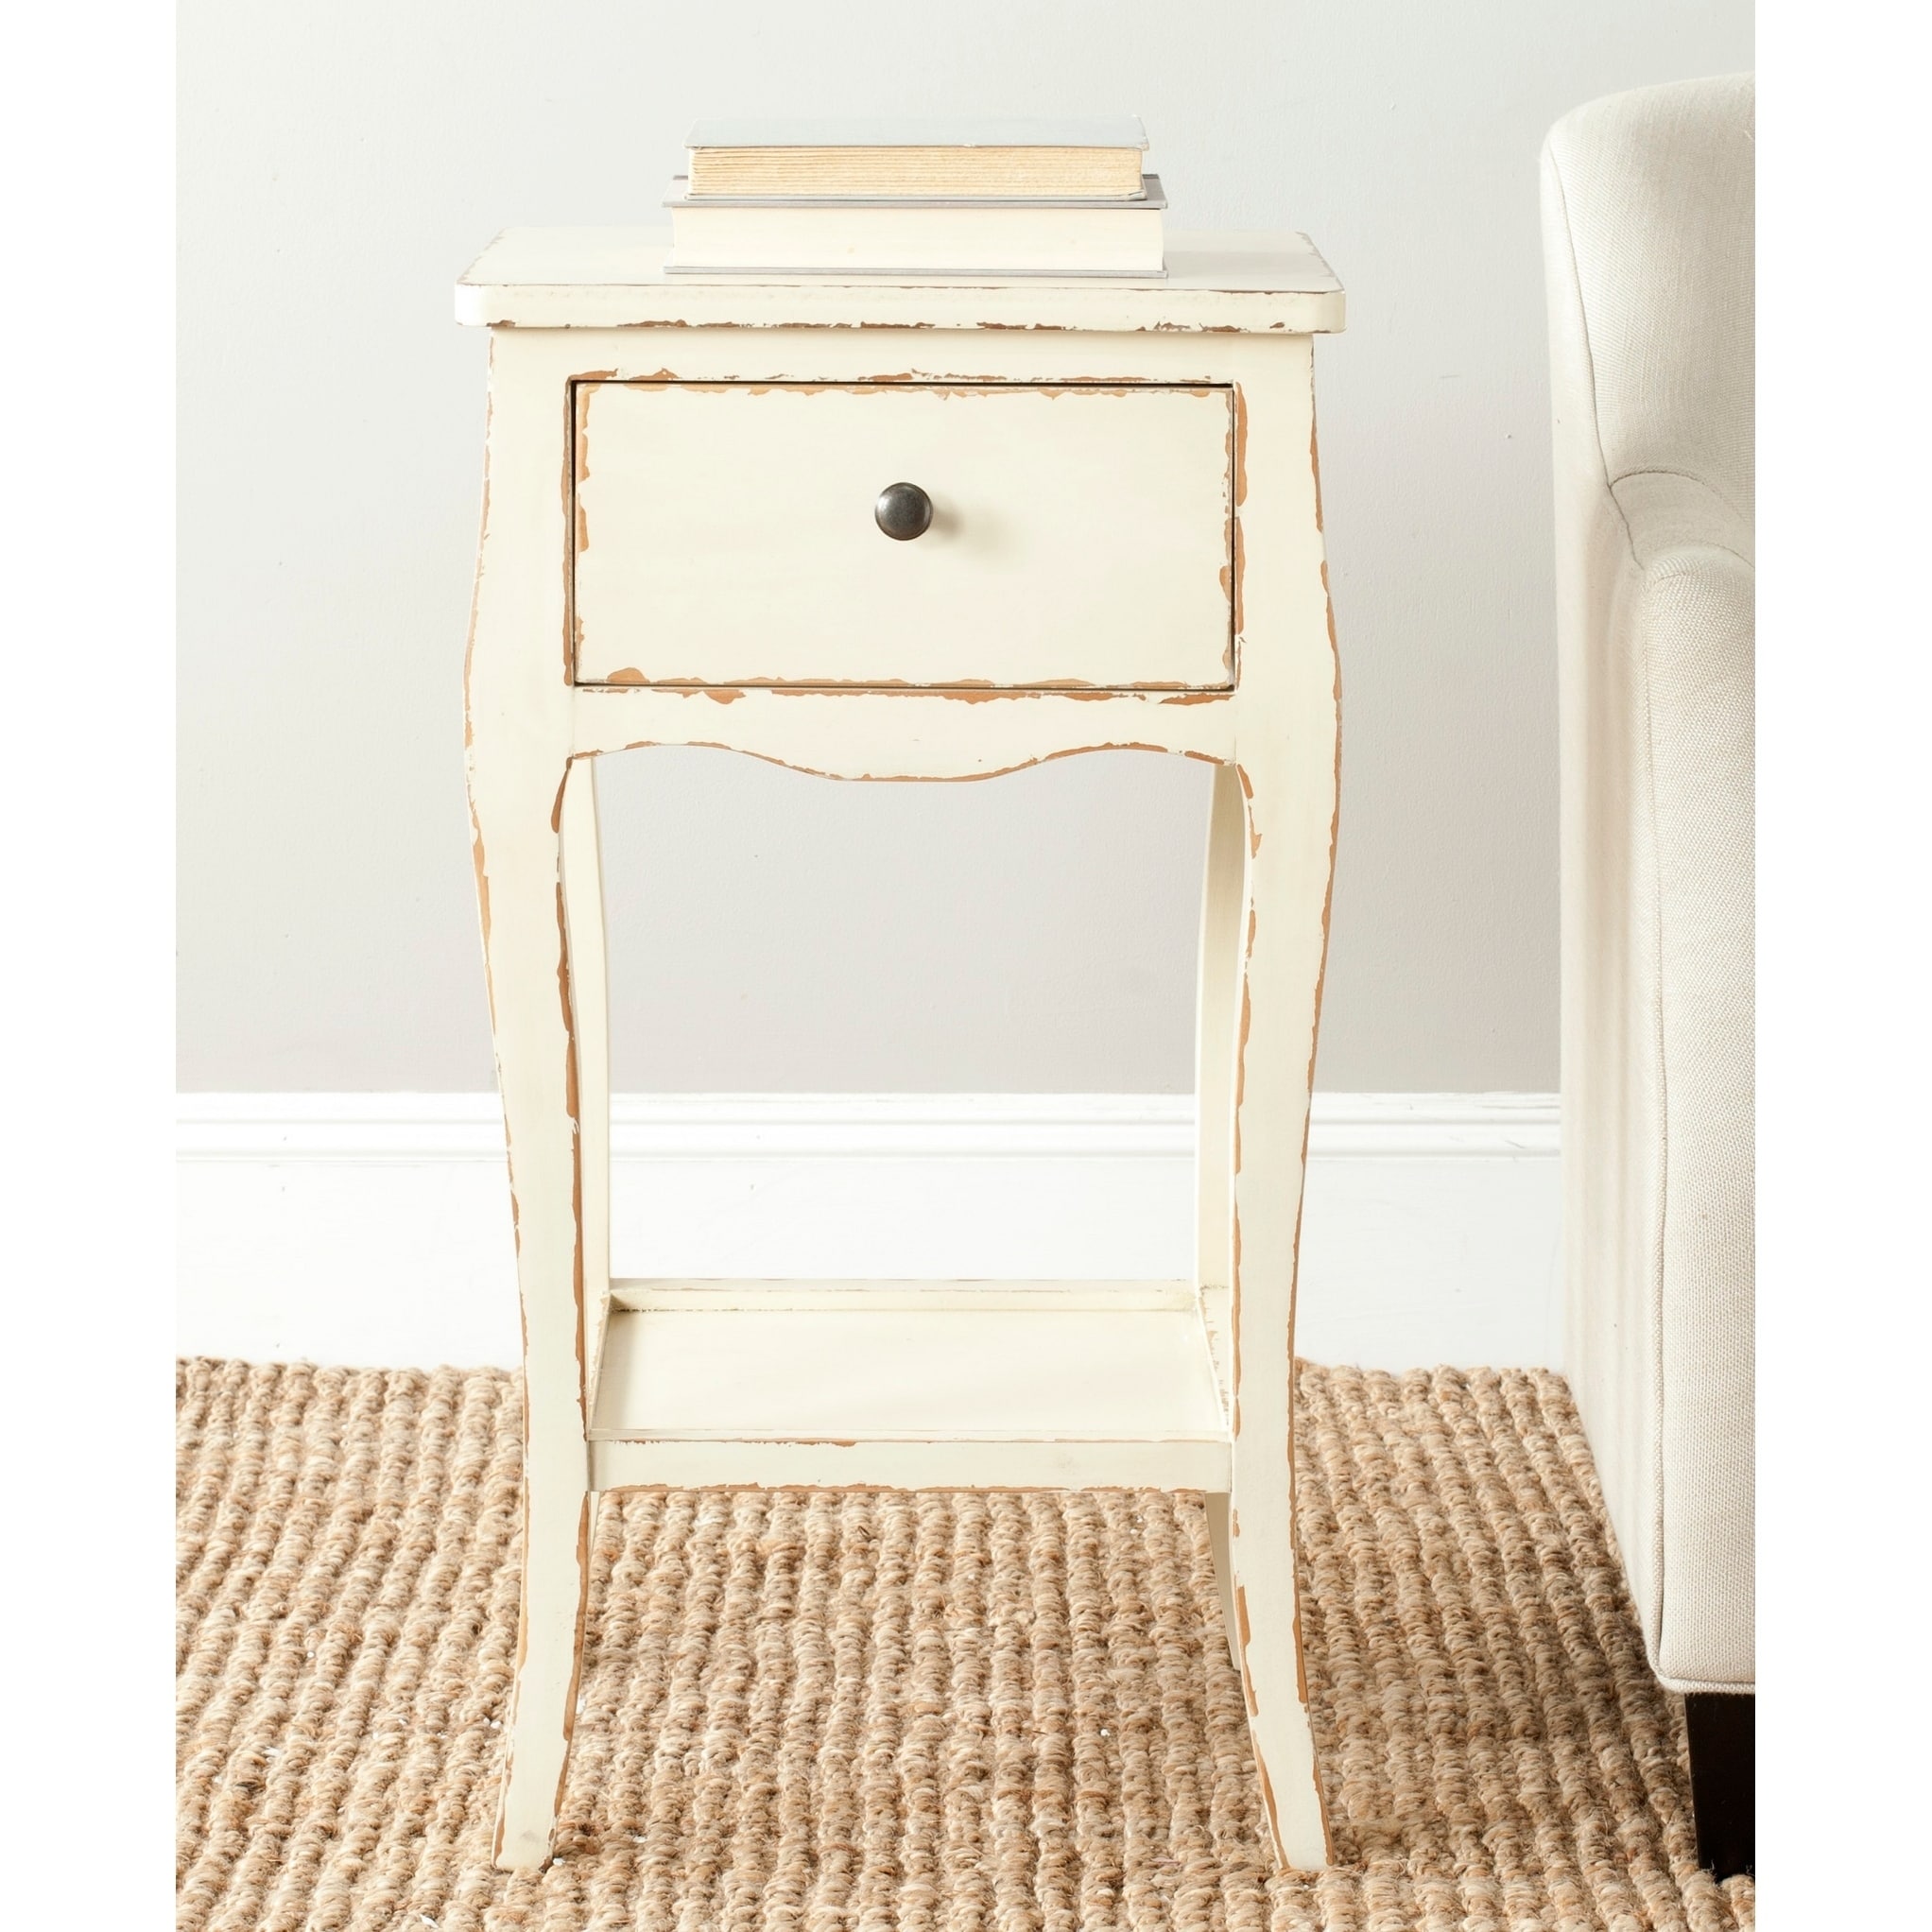 Thelma Distressed Vanilla End Table (Distressed vanillaMaterials Poplar woodDimensions 30 inches high x 16.1 inches wide x 14.2 inches deepThis product will ship to you in 1 box.Furniture arrives fully assembled )